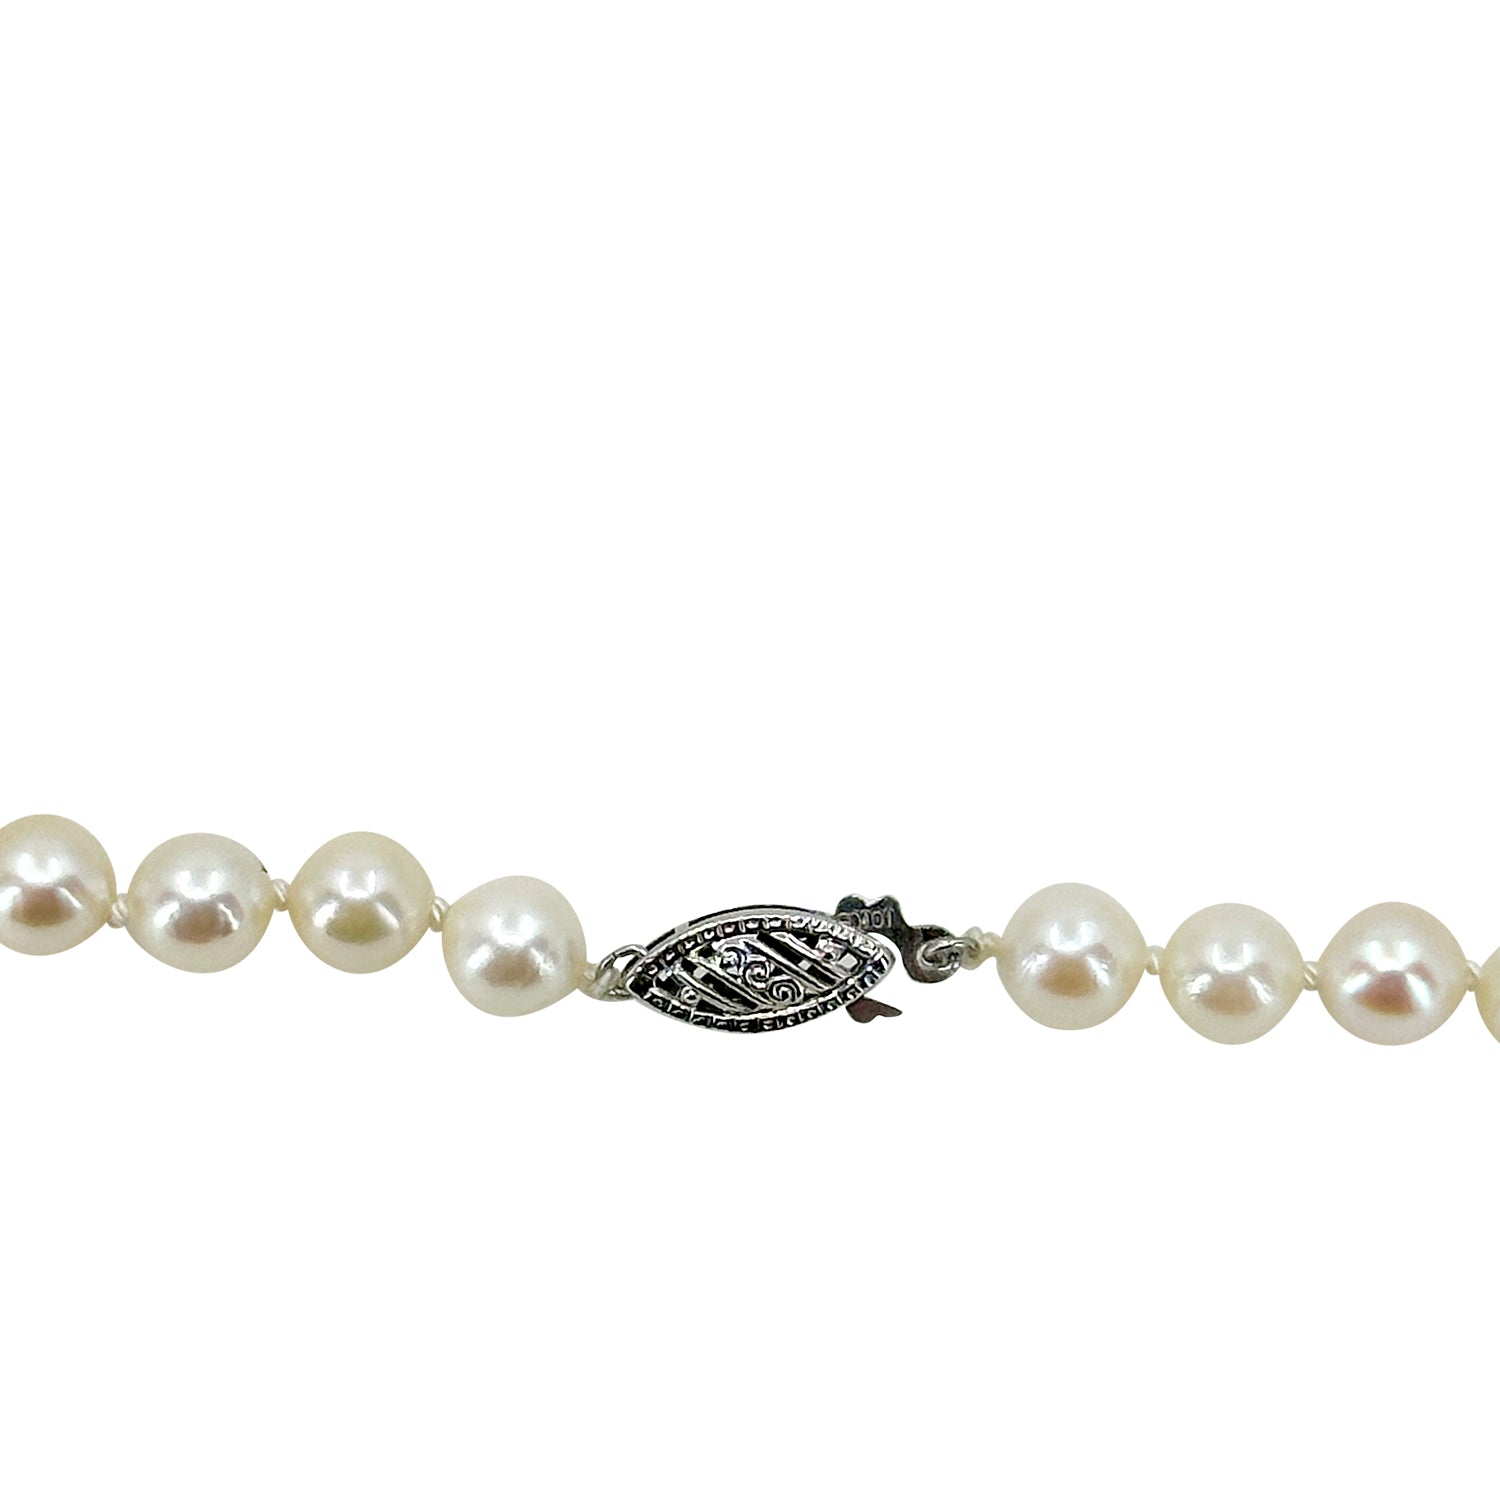 Pink Mid Century Japanese Saltwater Akoya Cultured Pearl Vintage Necklace - 10K White Gold 18.50 Inch